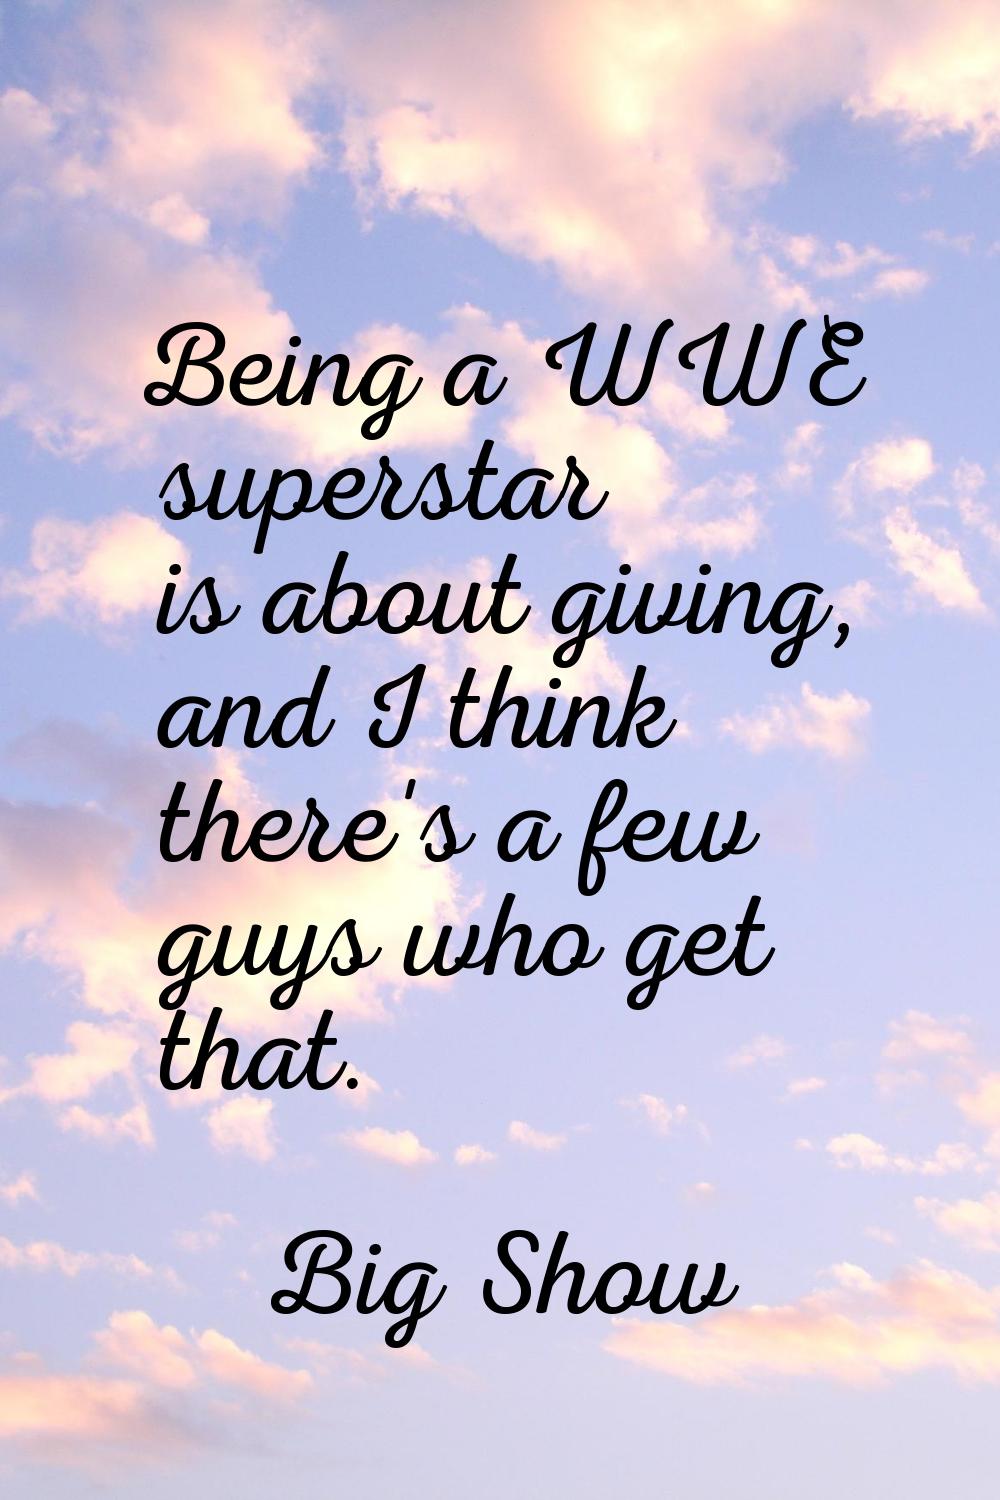 Being a WWE superstar is about giving, and I think there's a few guys who get that.